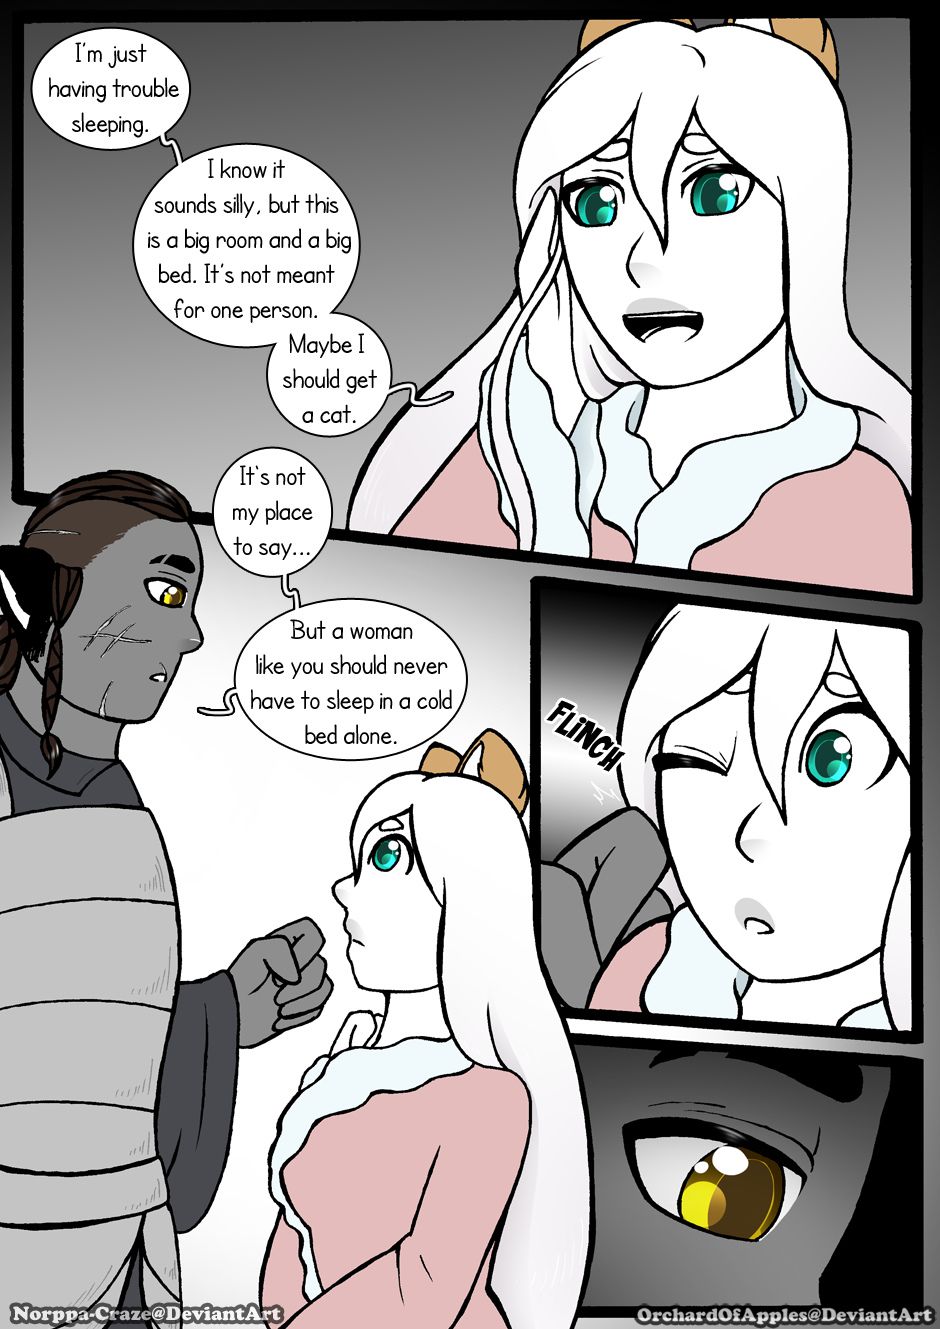 [Jeny-jen94] Between Kings and Queens [Ongoing] 315